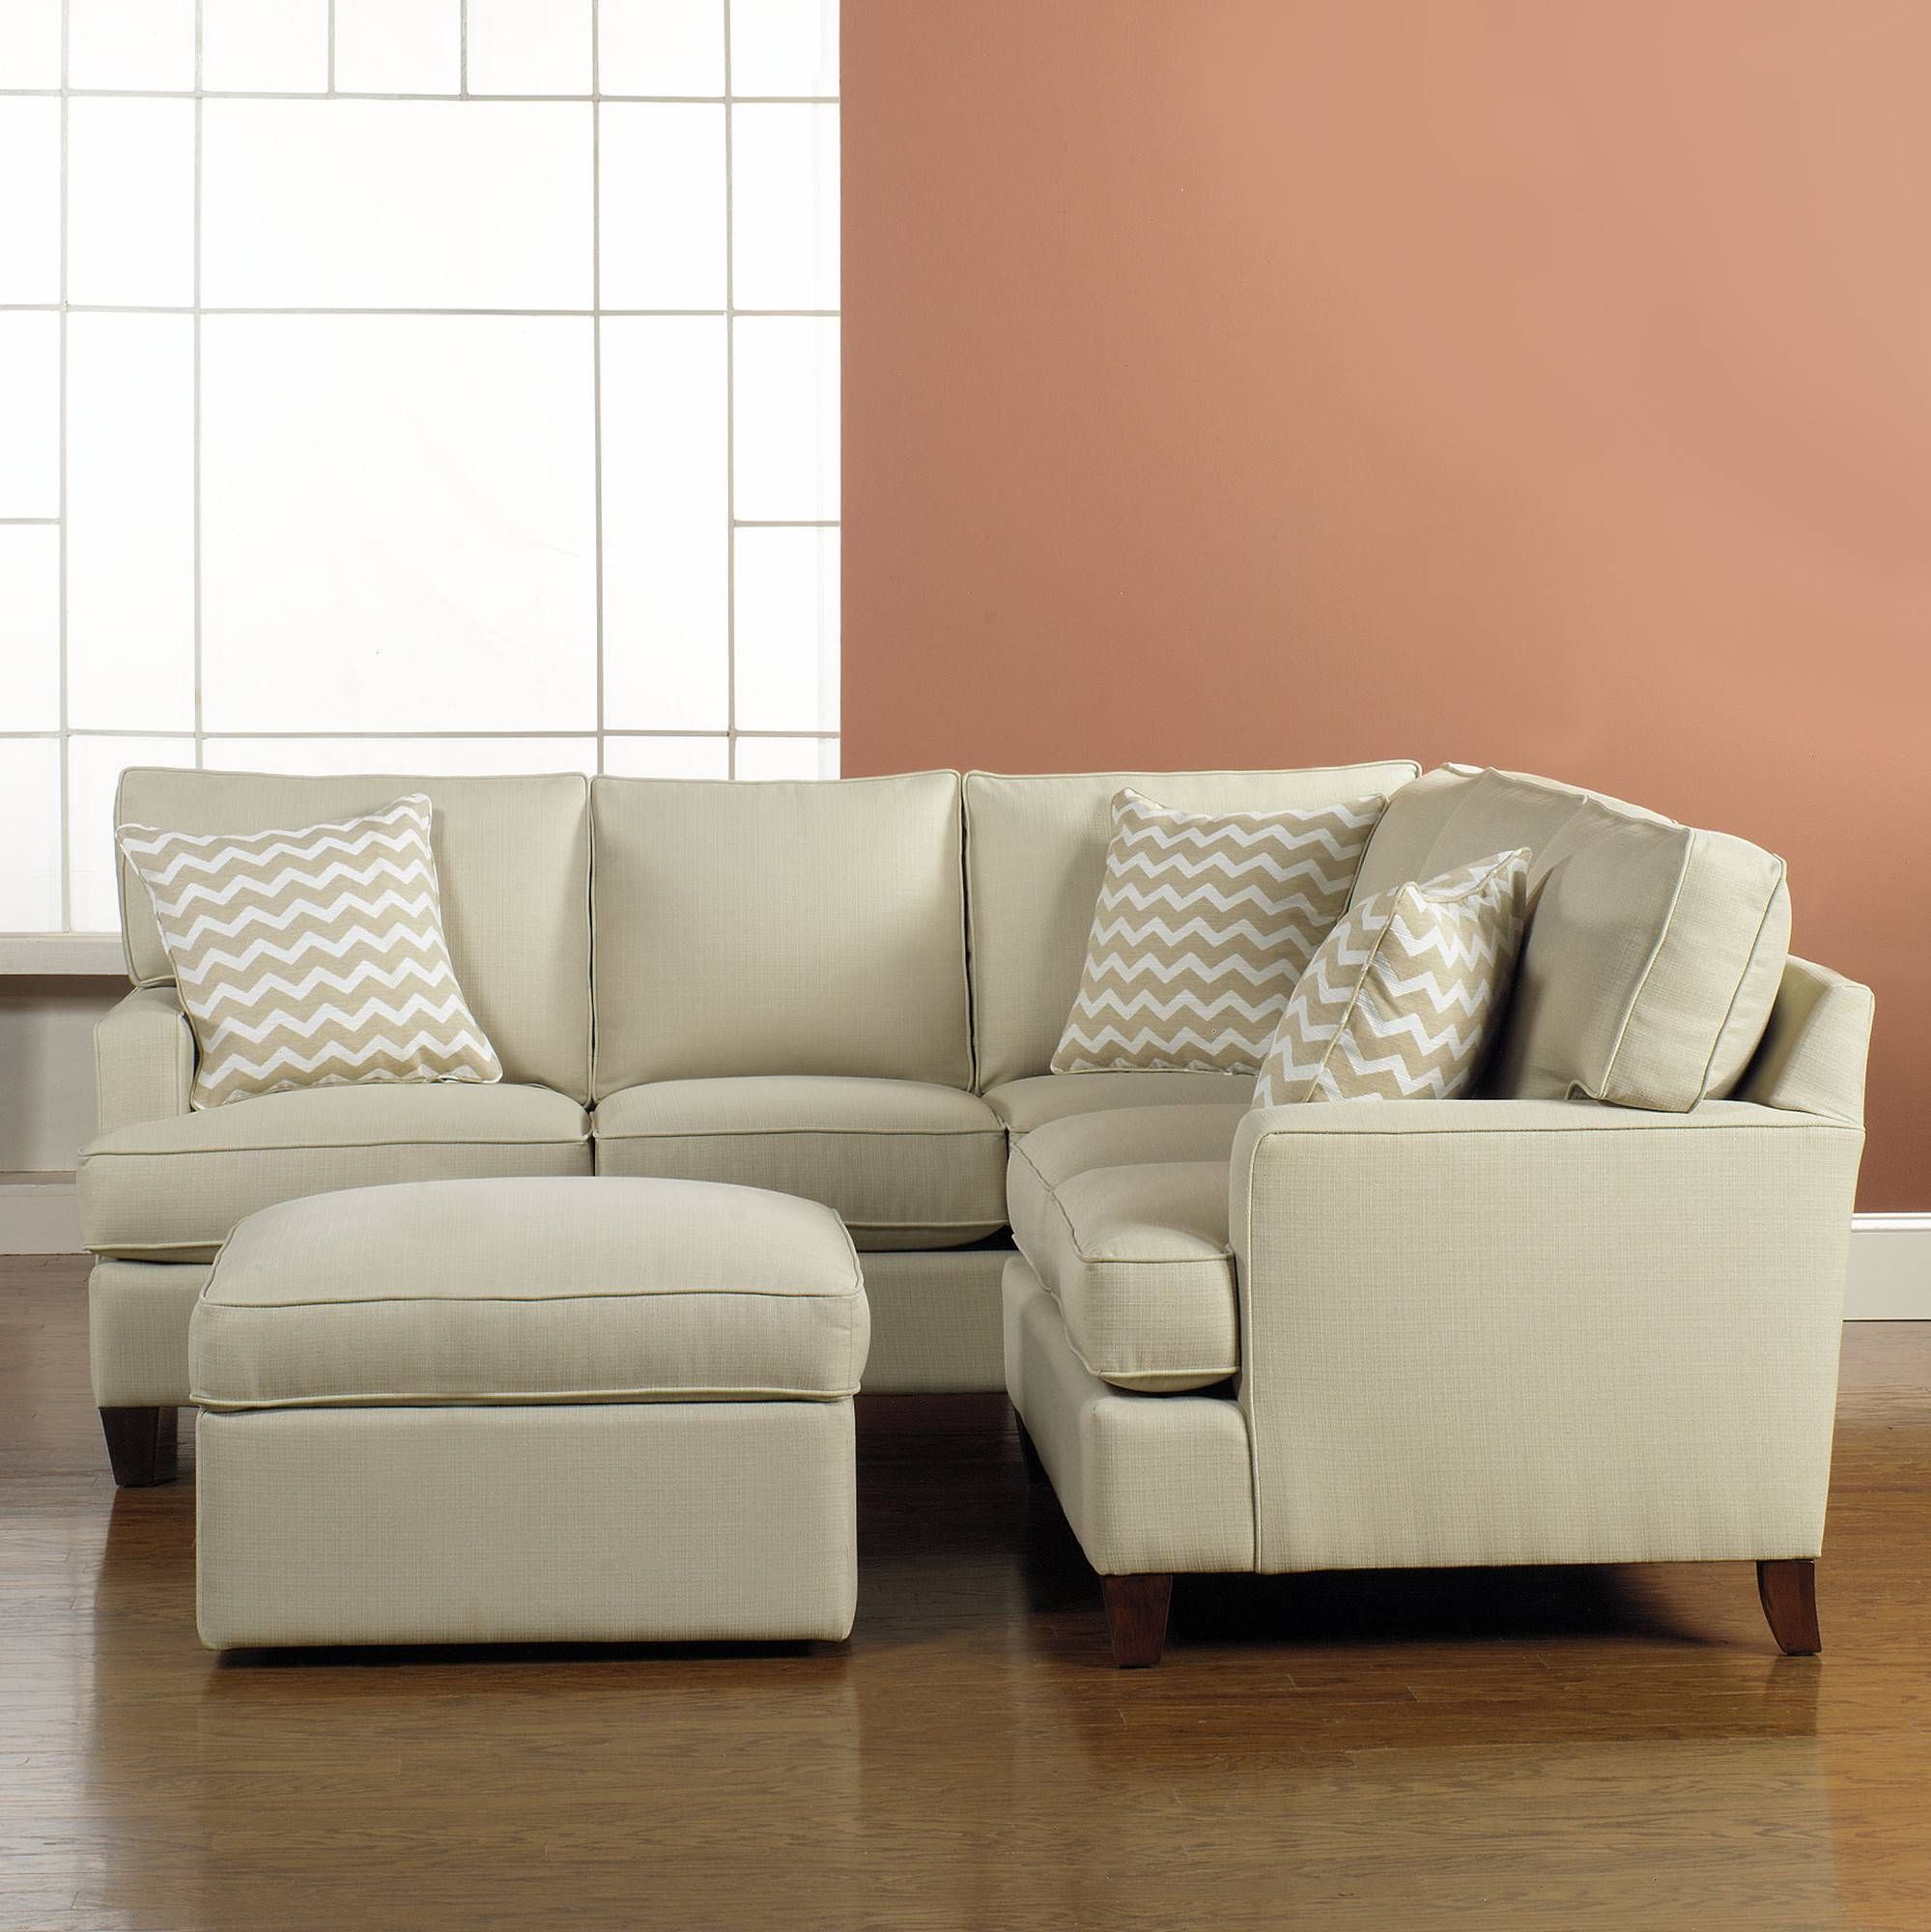 Featured Photo of Top 25 of Modern Sectional Sofas for Small Spaces